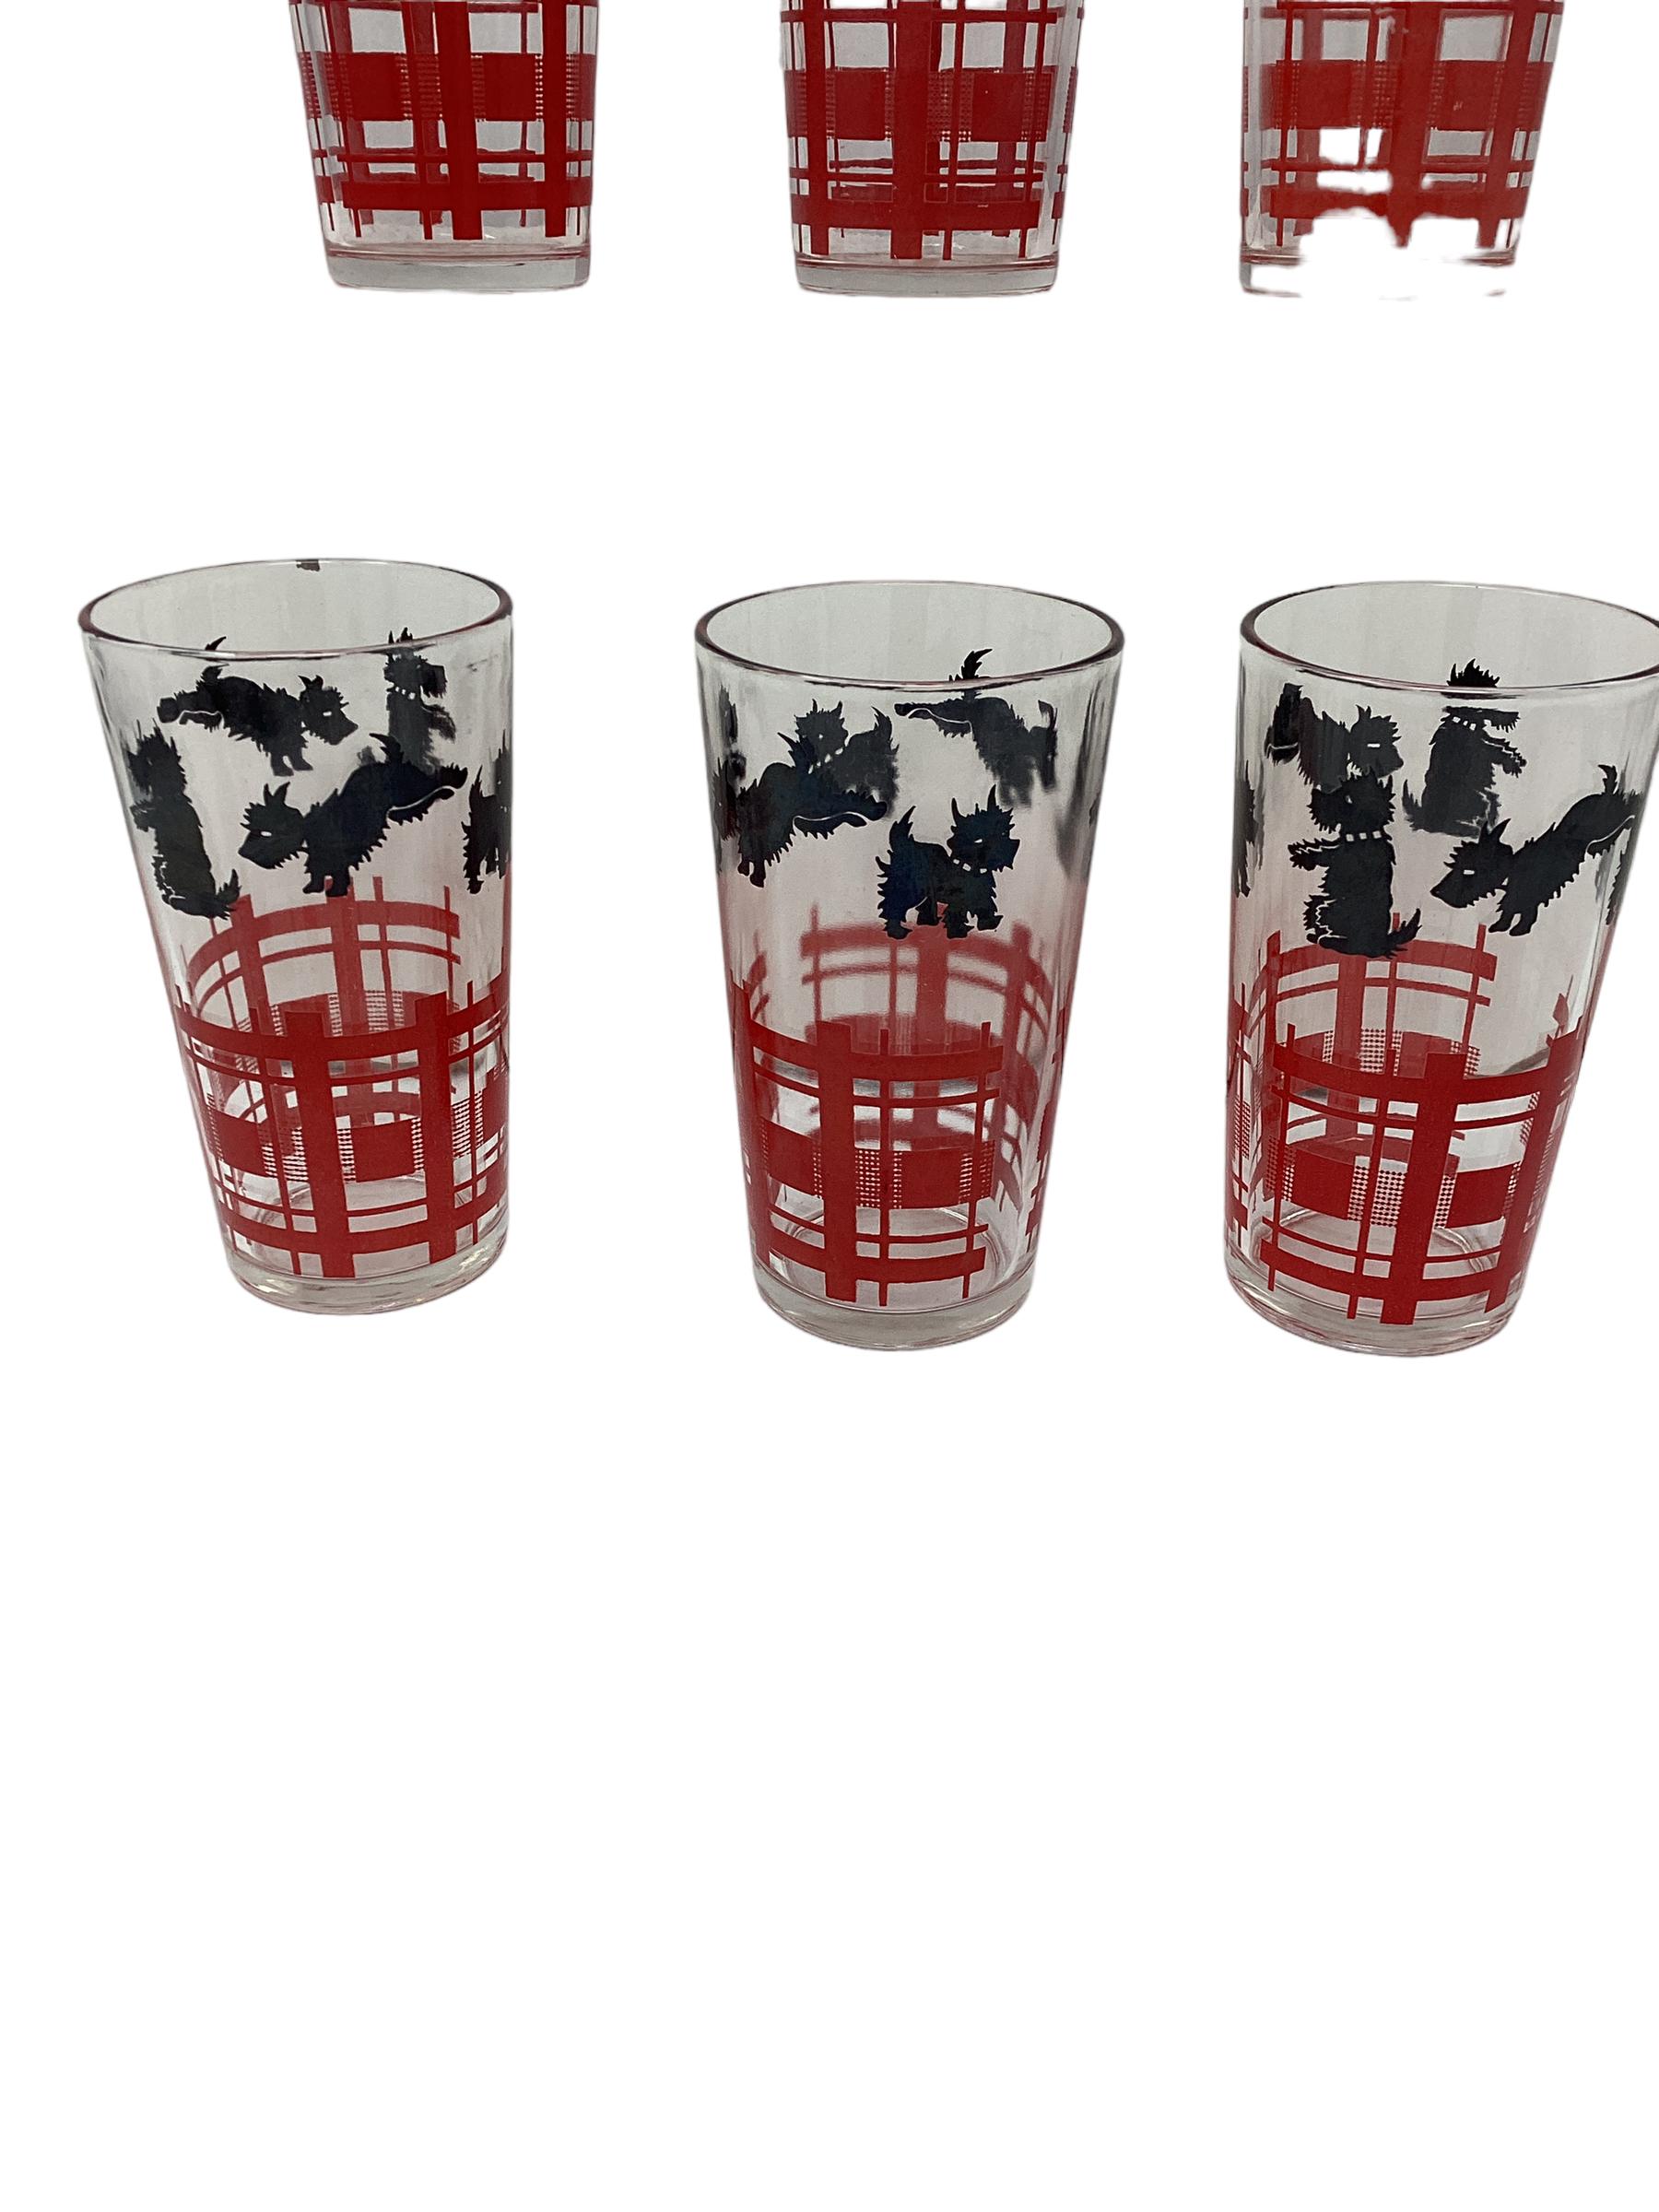 Set of 6 Vintage Hazel Atlas Scotty Tumblers. Playful black scotties in various jumping pose leaping over a red enamel fence. 
We have 3 sets available in this pattern.